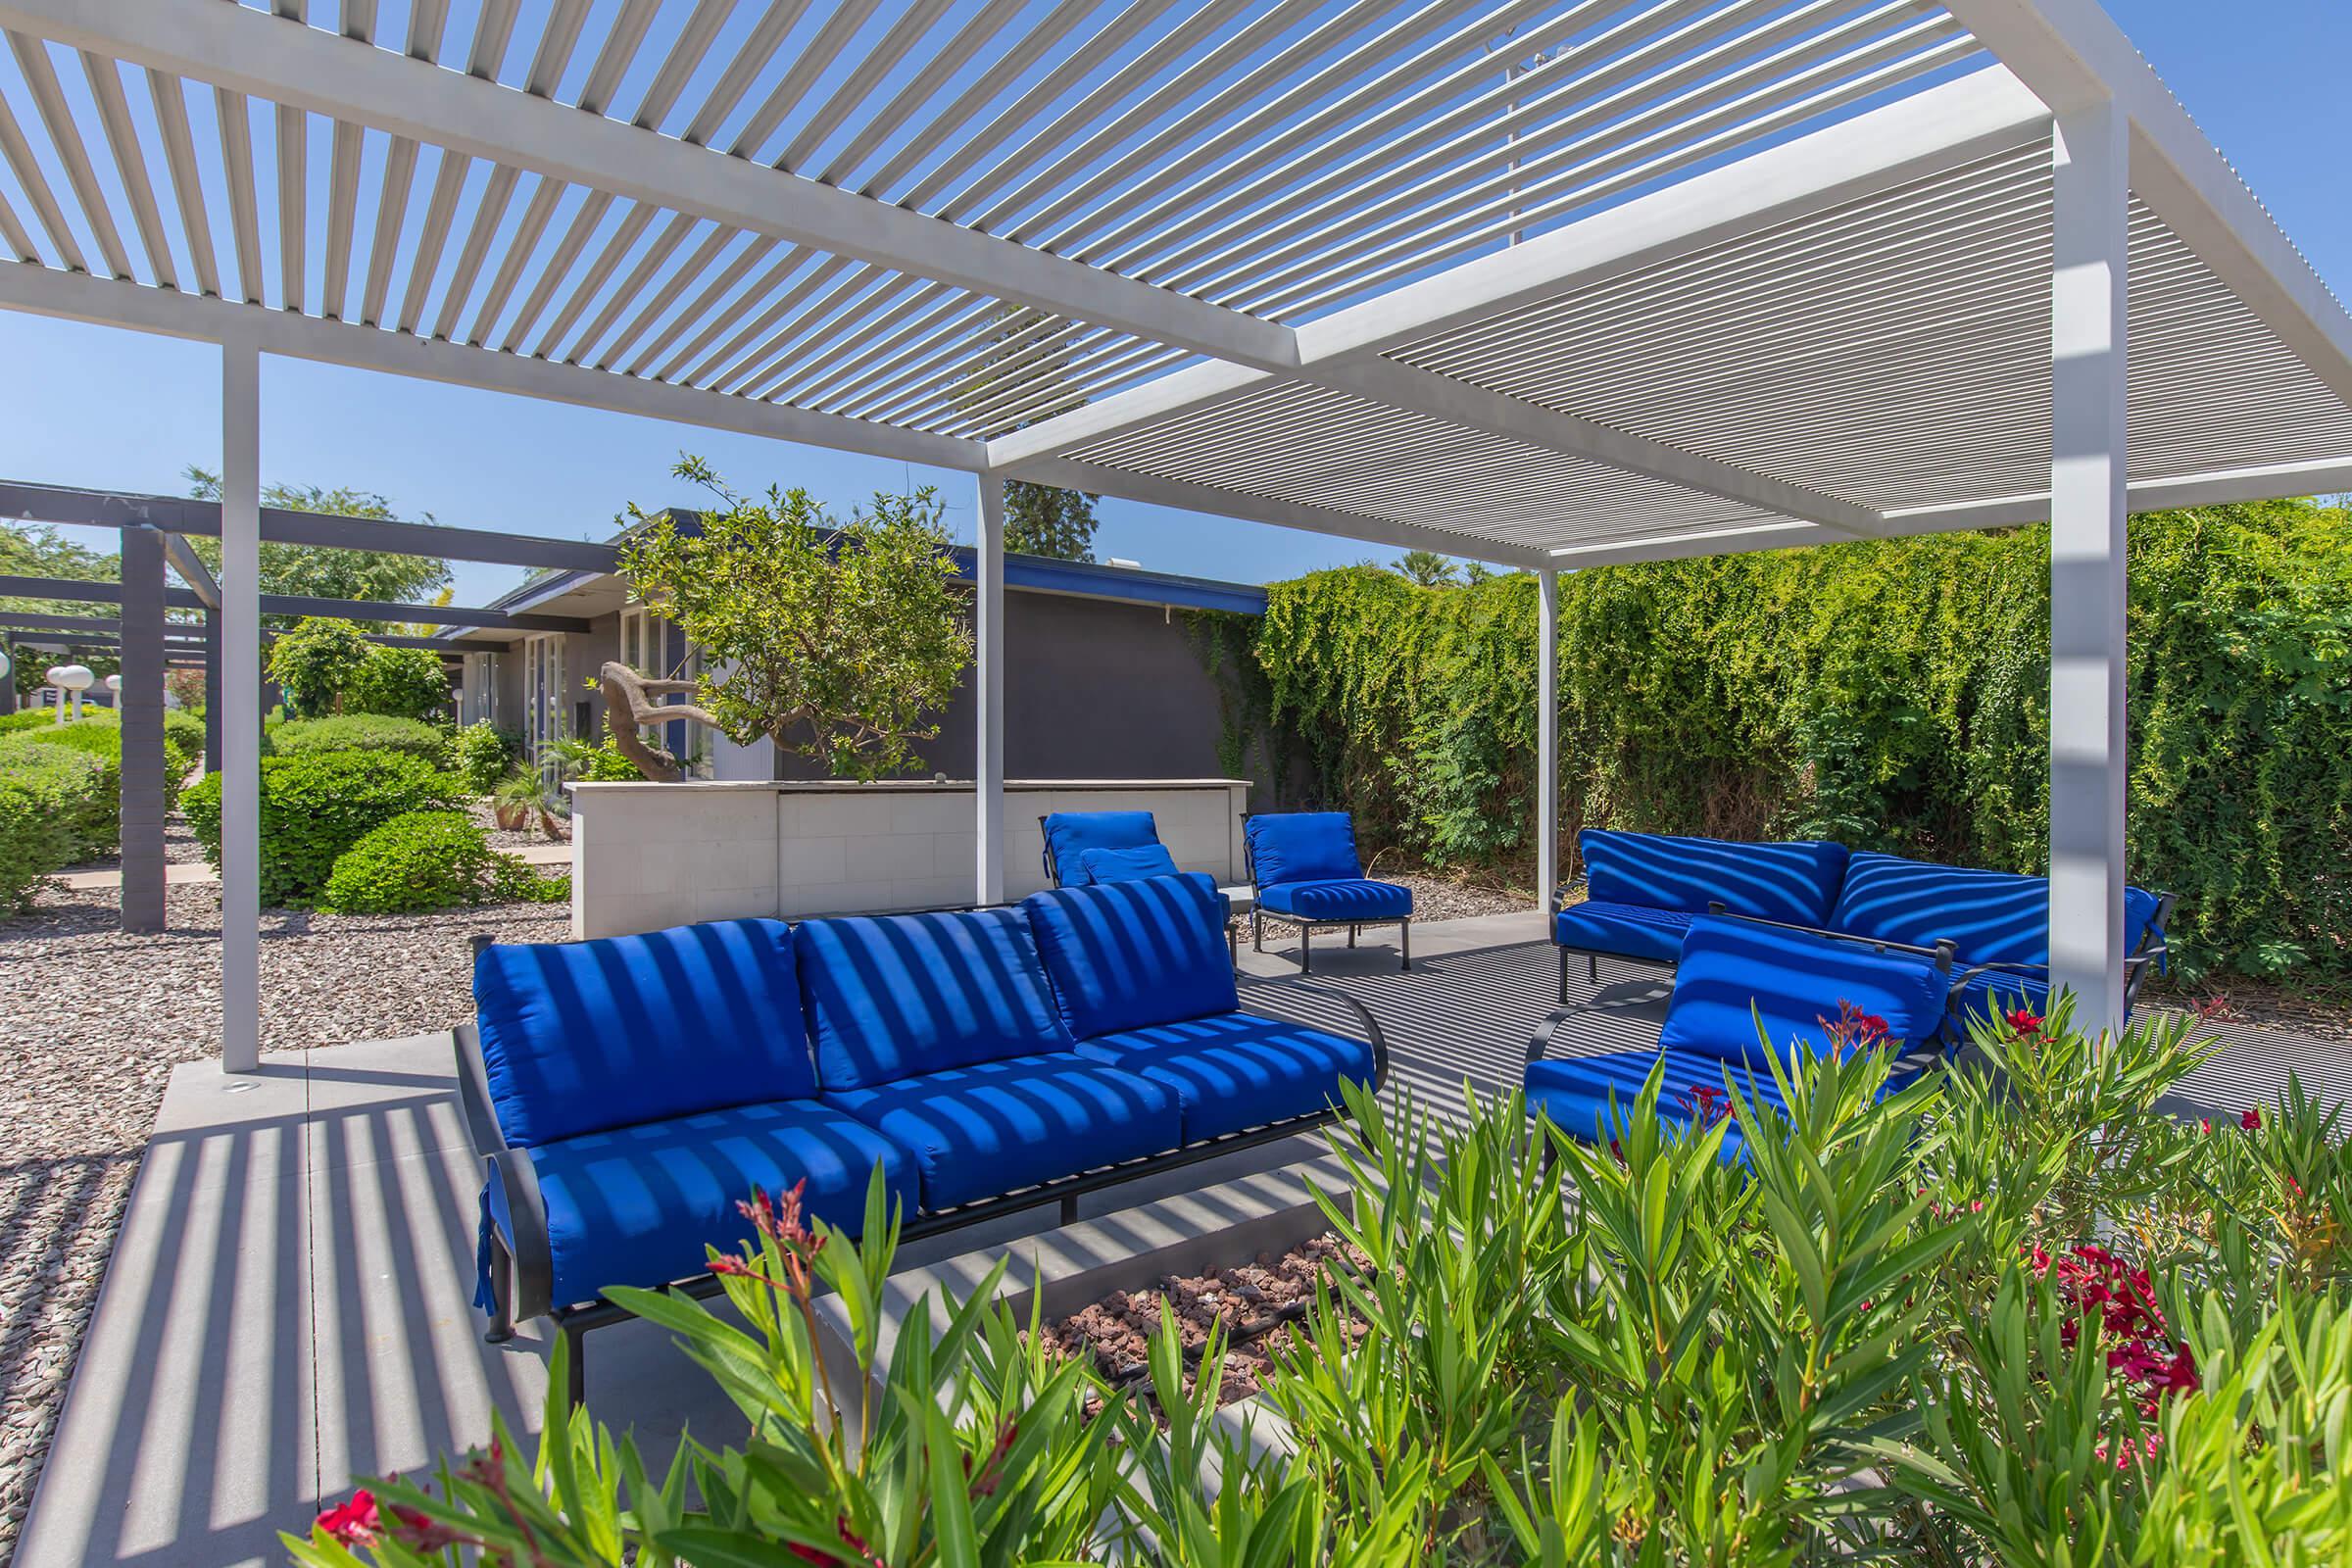 Phoenix, AZ outdoor shaded patio area with blue lounge couch seating around an electric fire pit